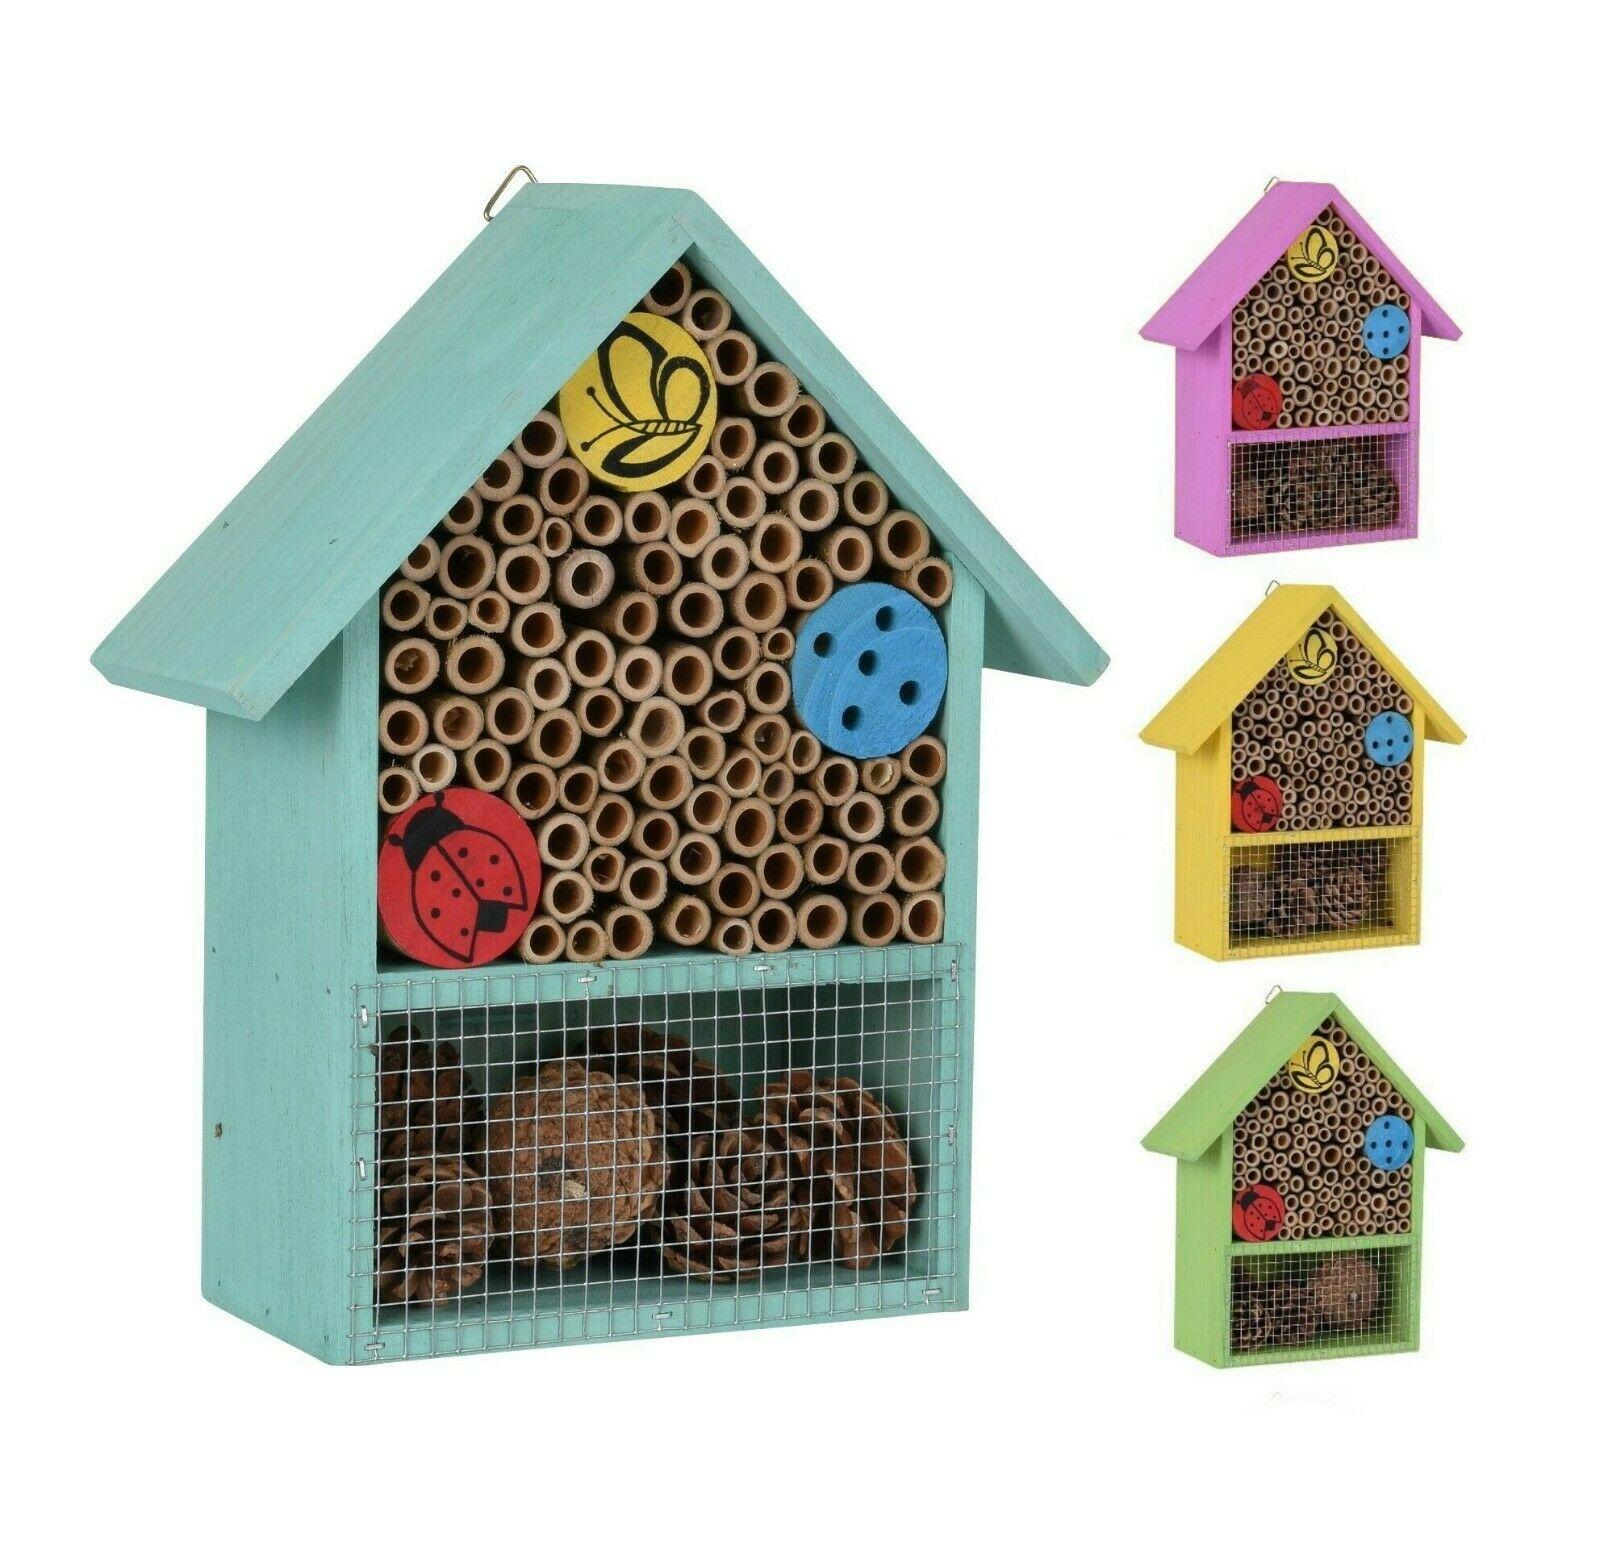 Details about   Wooden Insect Bee House Natural Wood Bug Hotel Shelter Garden Nest Box Outdoor 